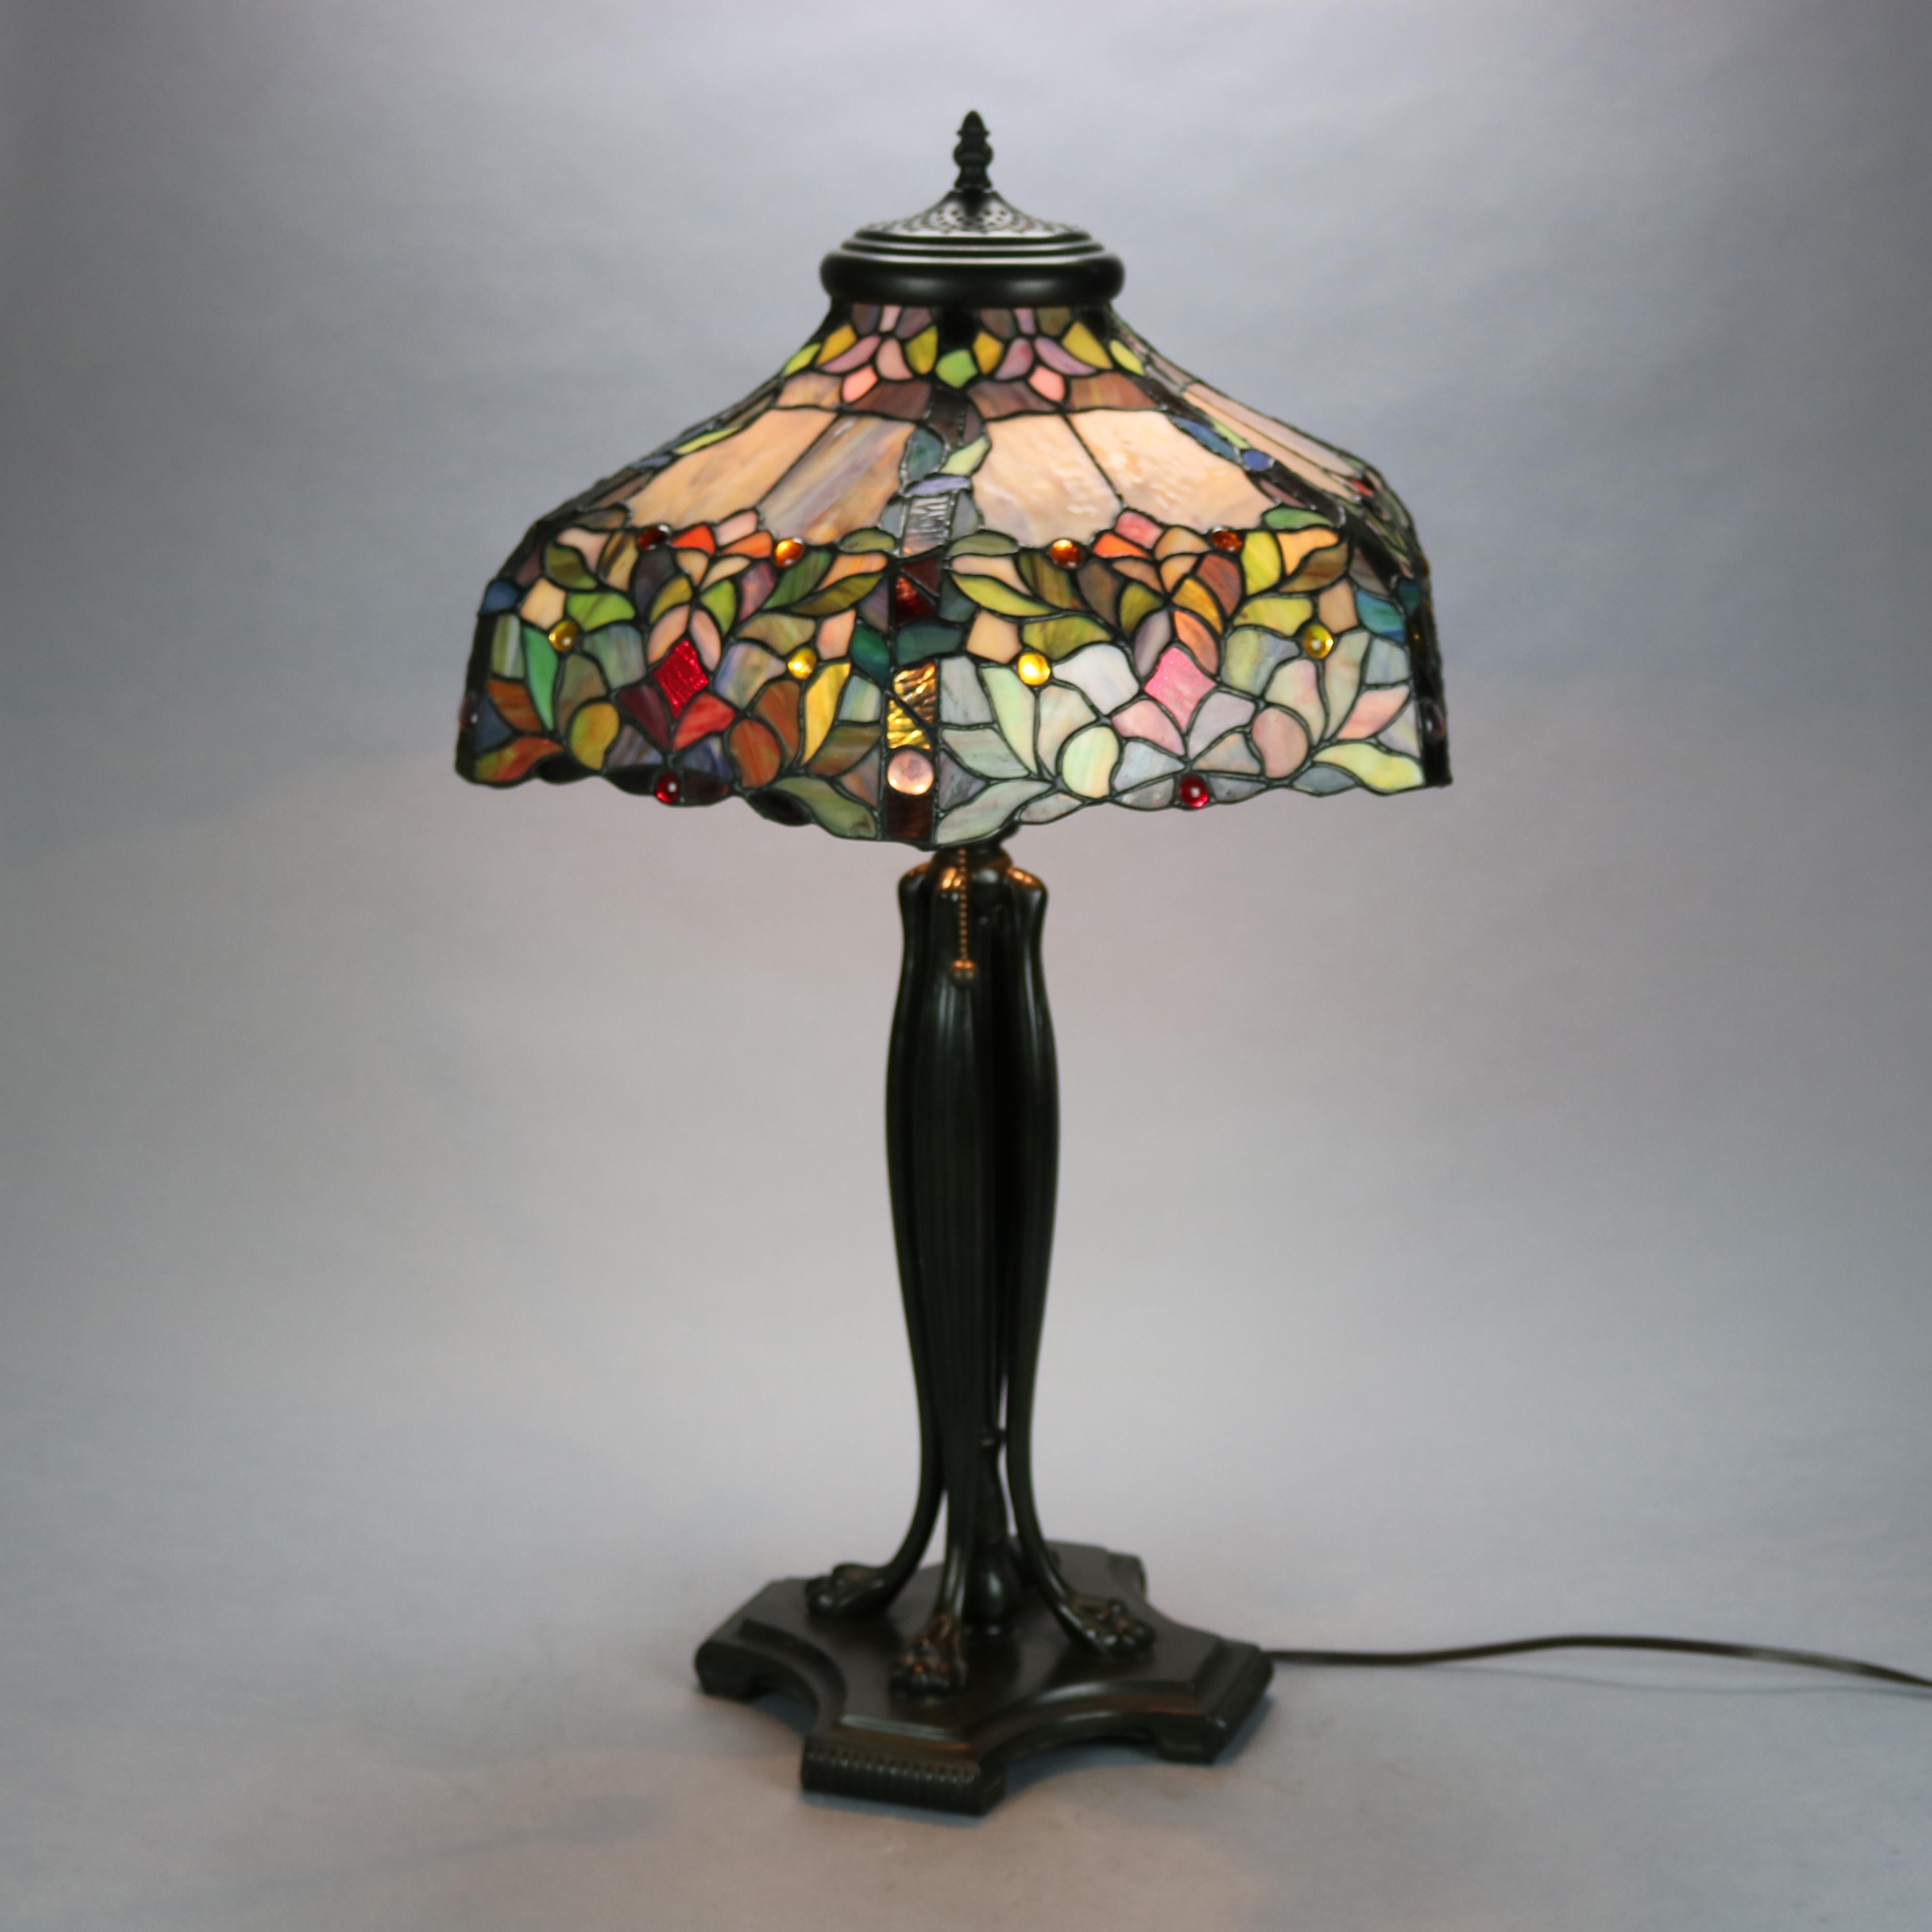 Unknown Vintage Dale Tiffany Leaded Glass Table Lamp with Bronzed Metal Base, 20th C